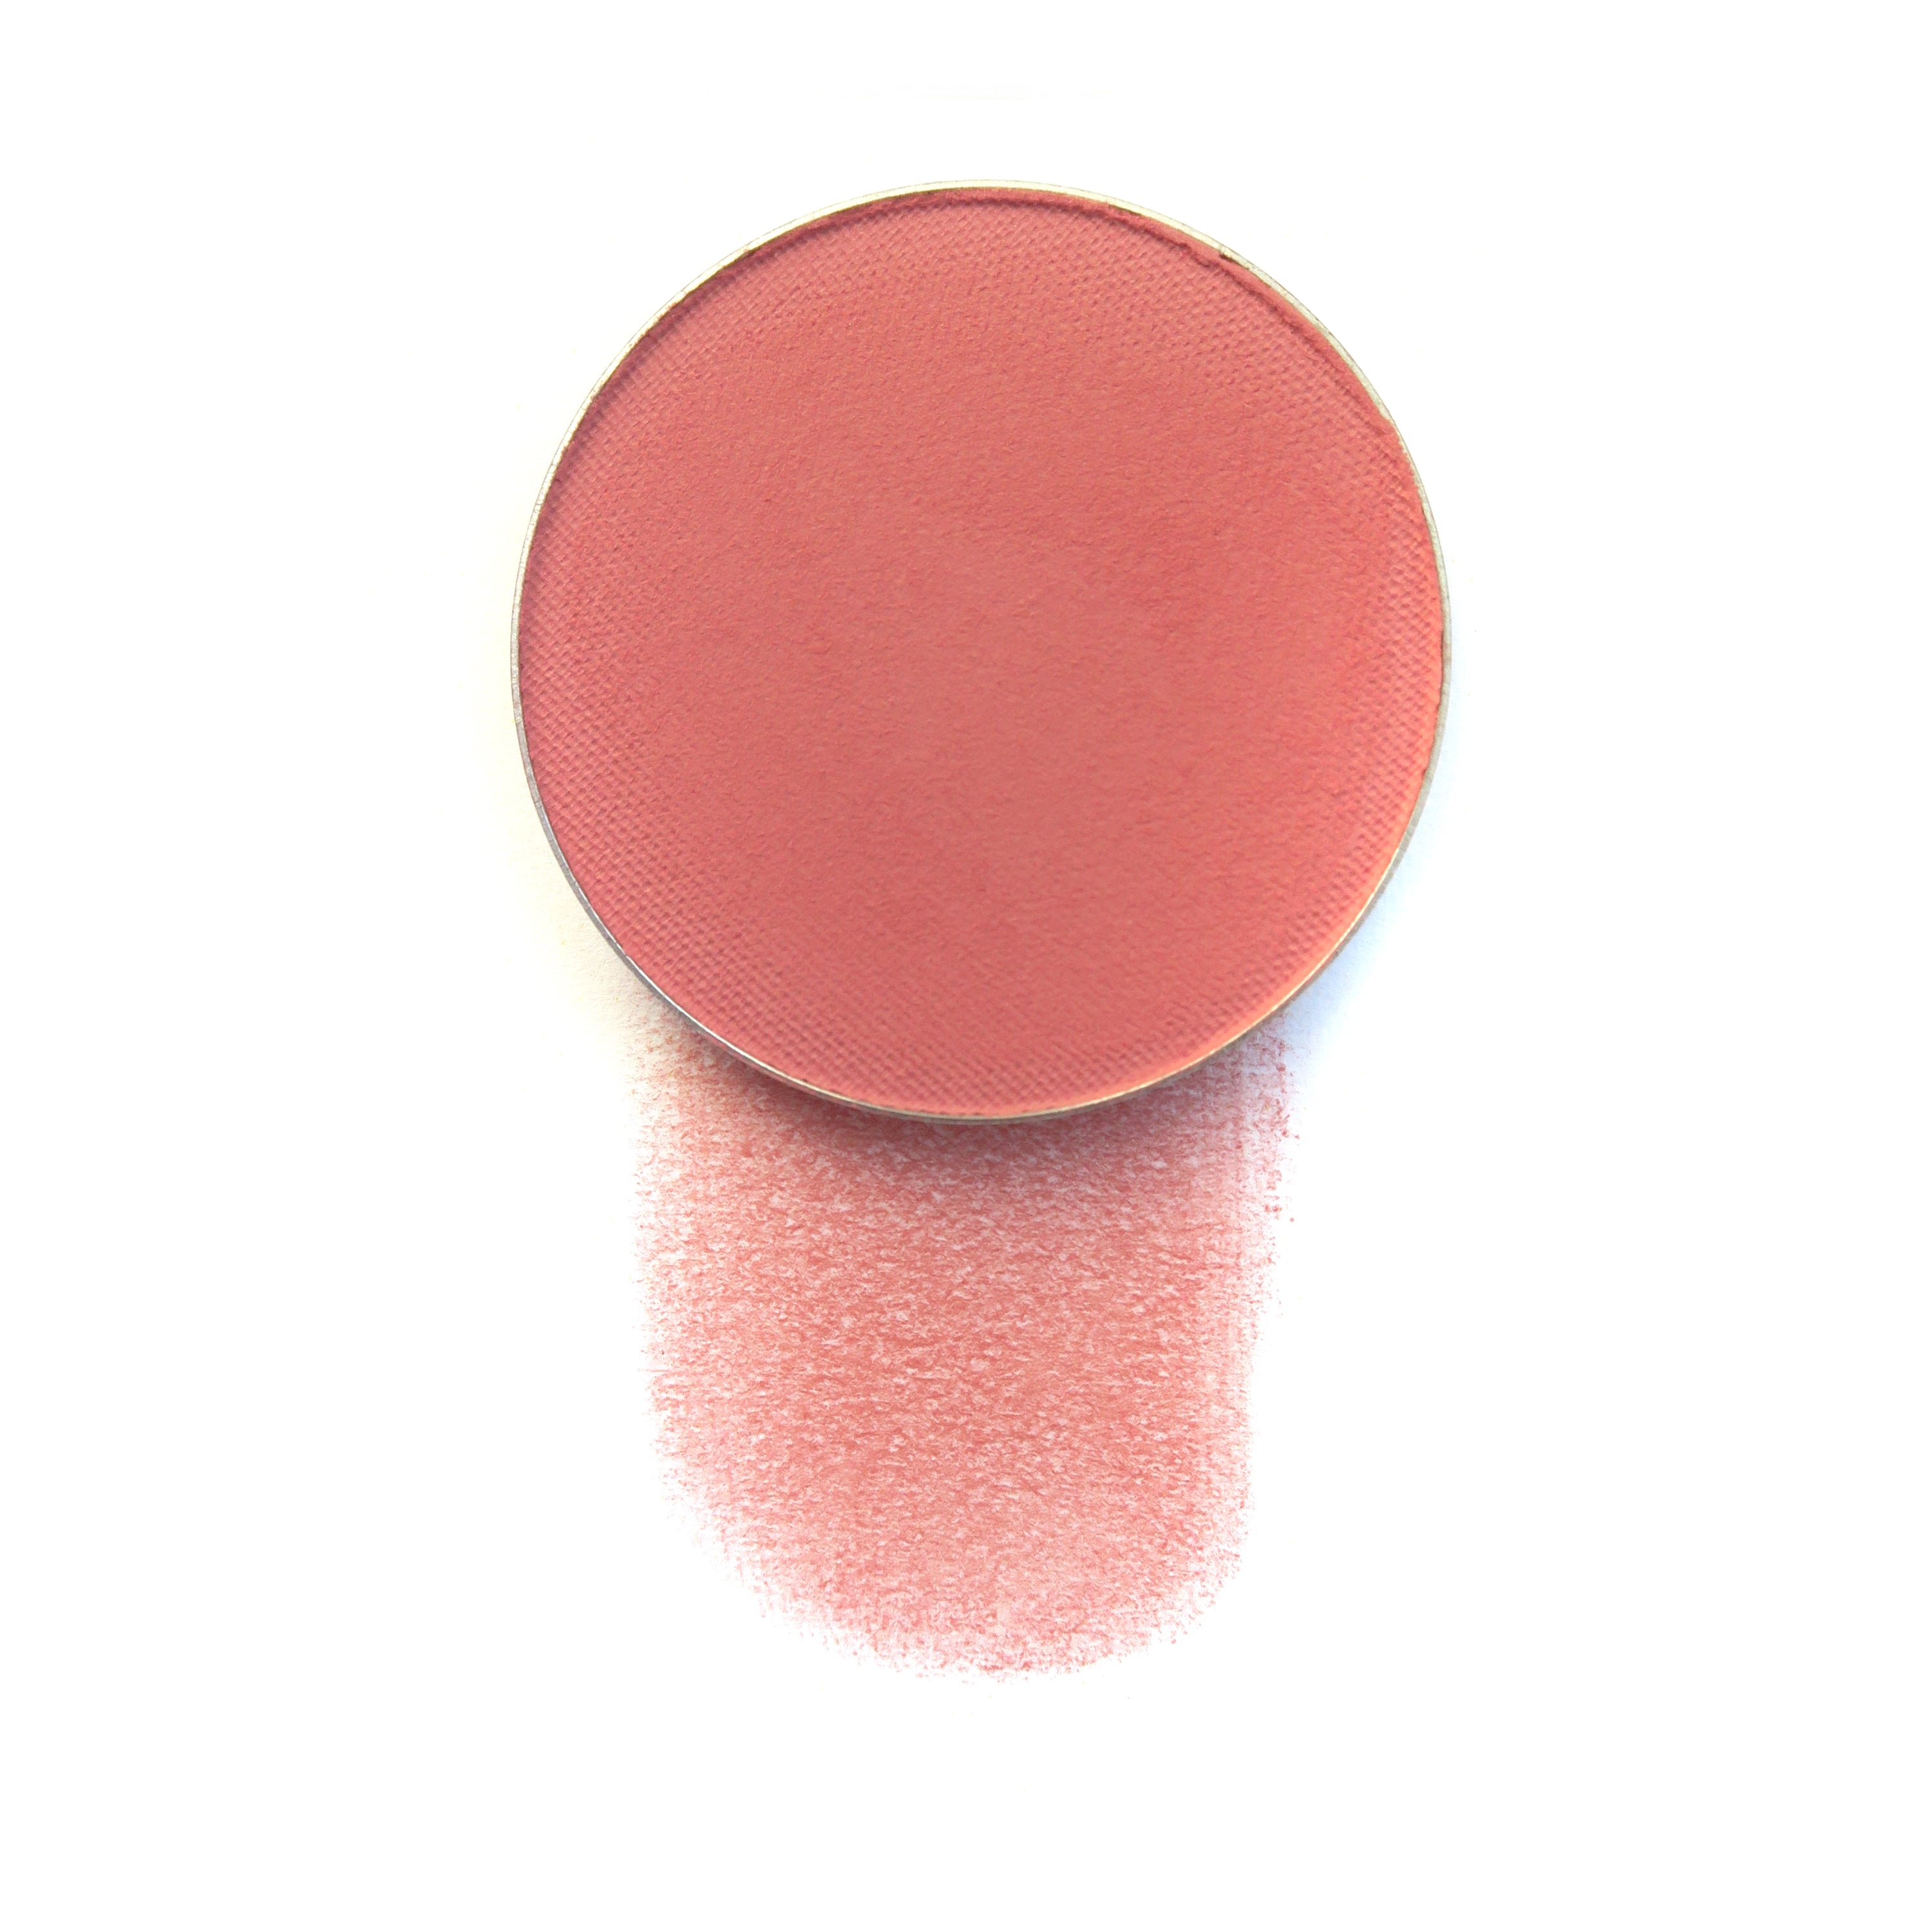 NARS Blissful Powder Blush Review & Swatches